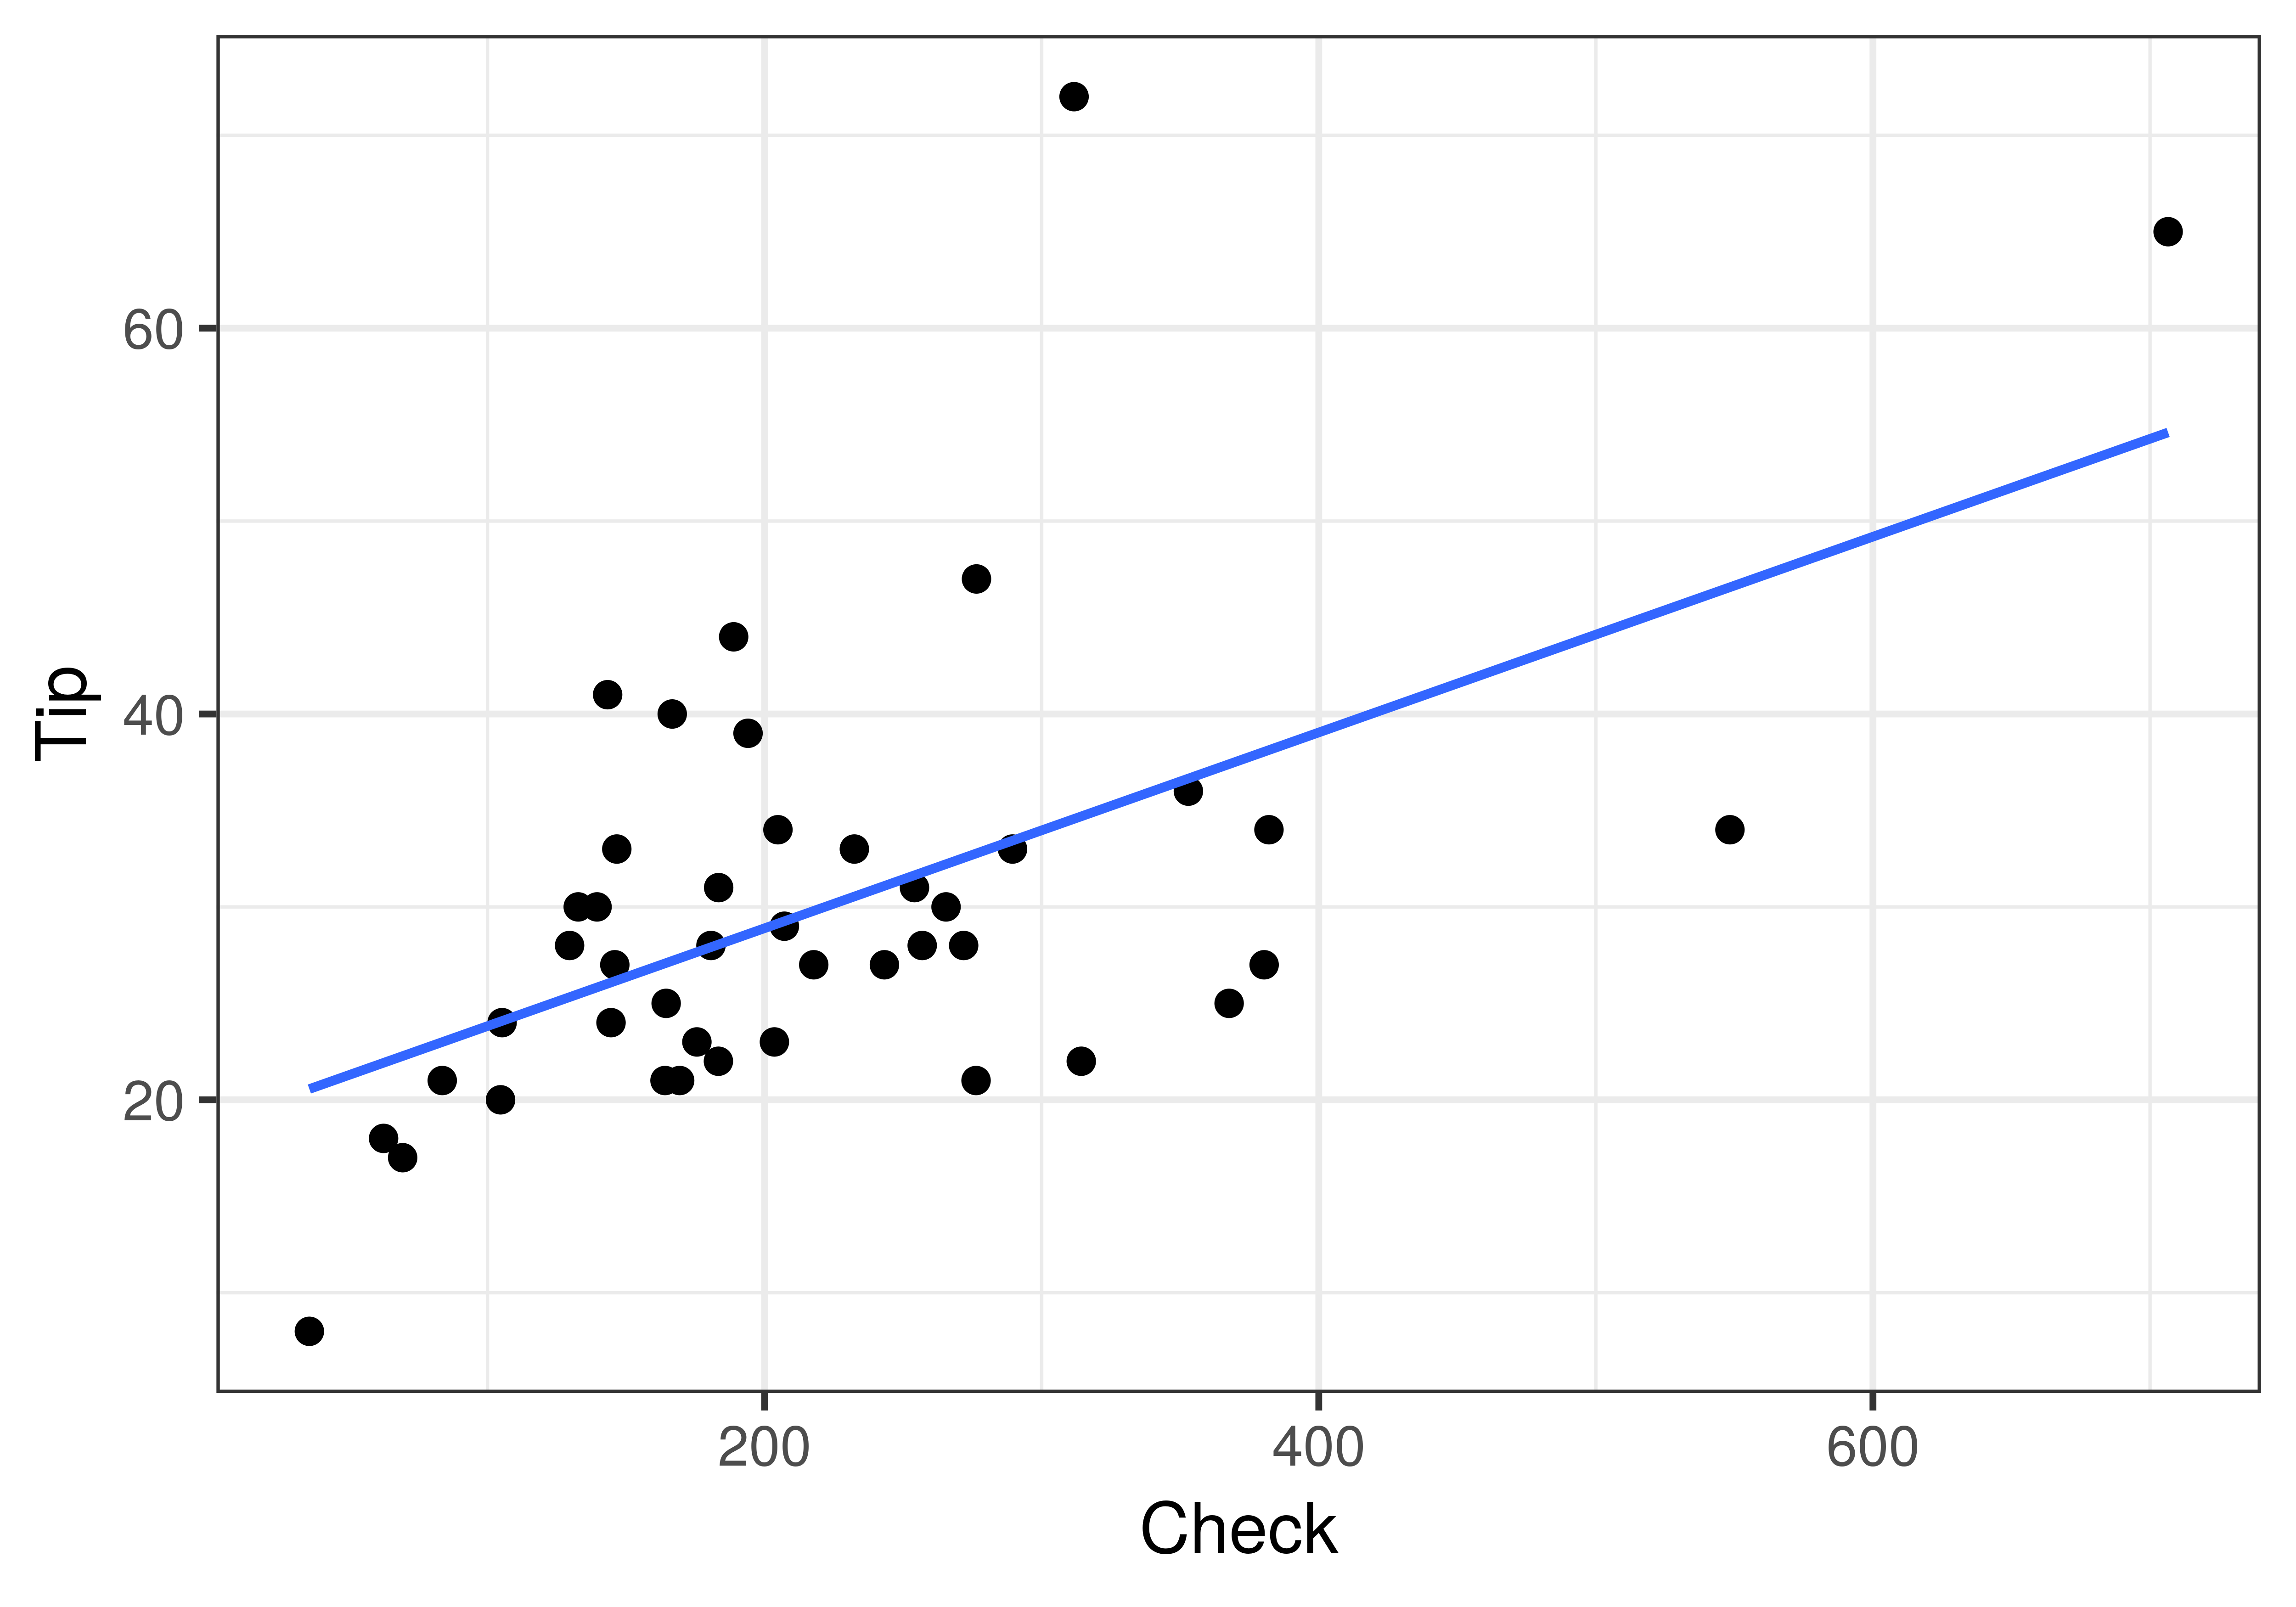 A scatterplot of TIp predicted by Check. There is a regression line depicting an upward trend in the data.